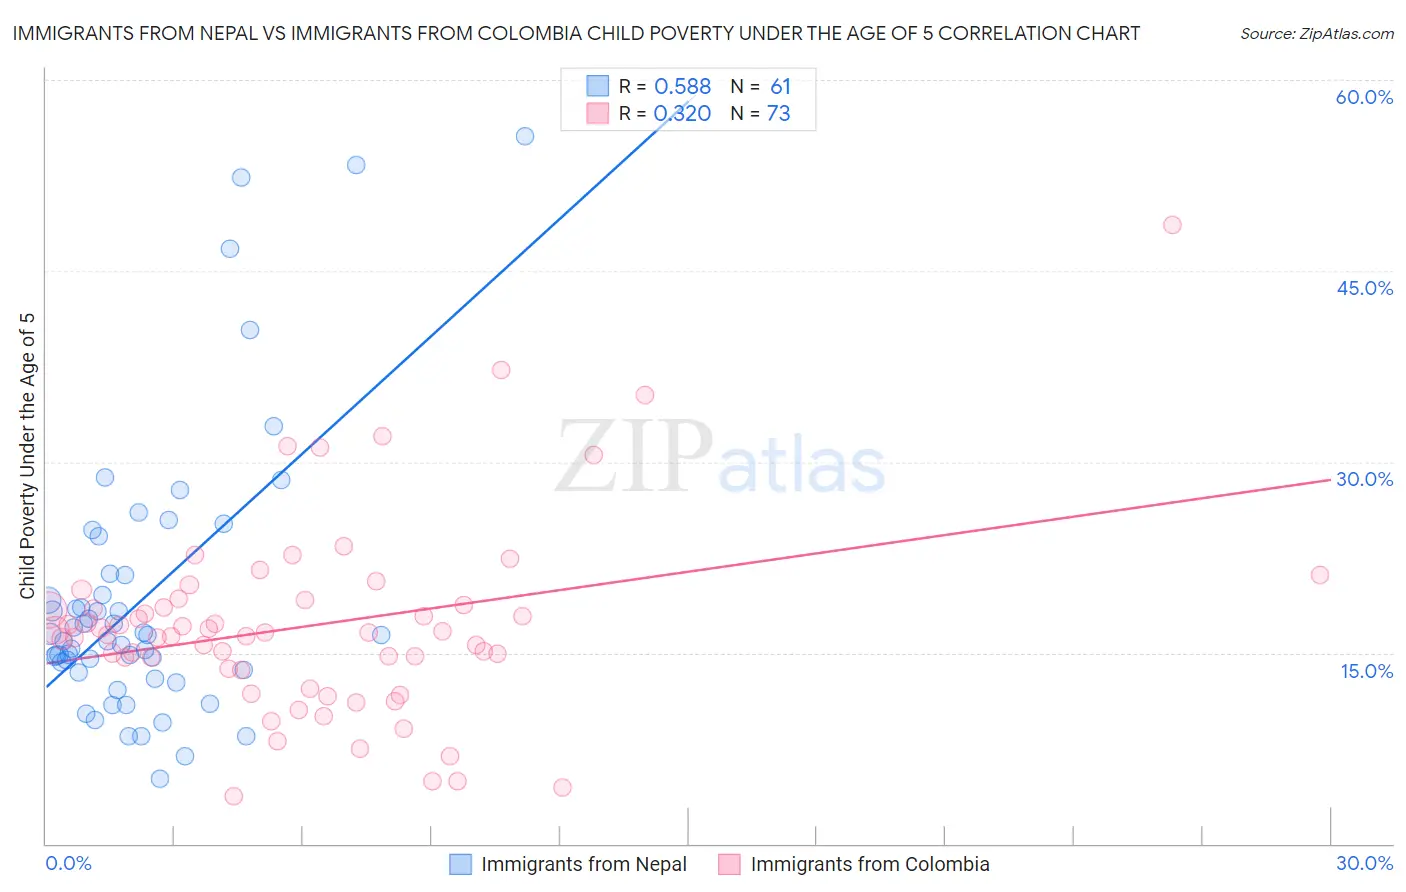 Immigrants from Nepal vs Immigrants from Colombia Child Poverty Under the Age of 5